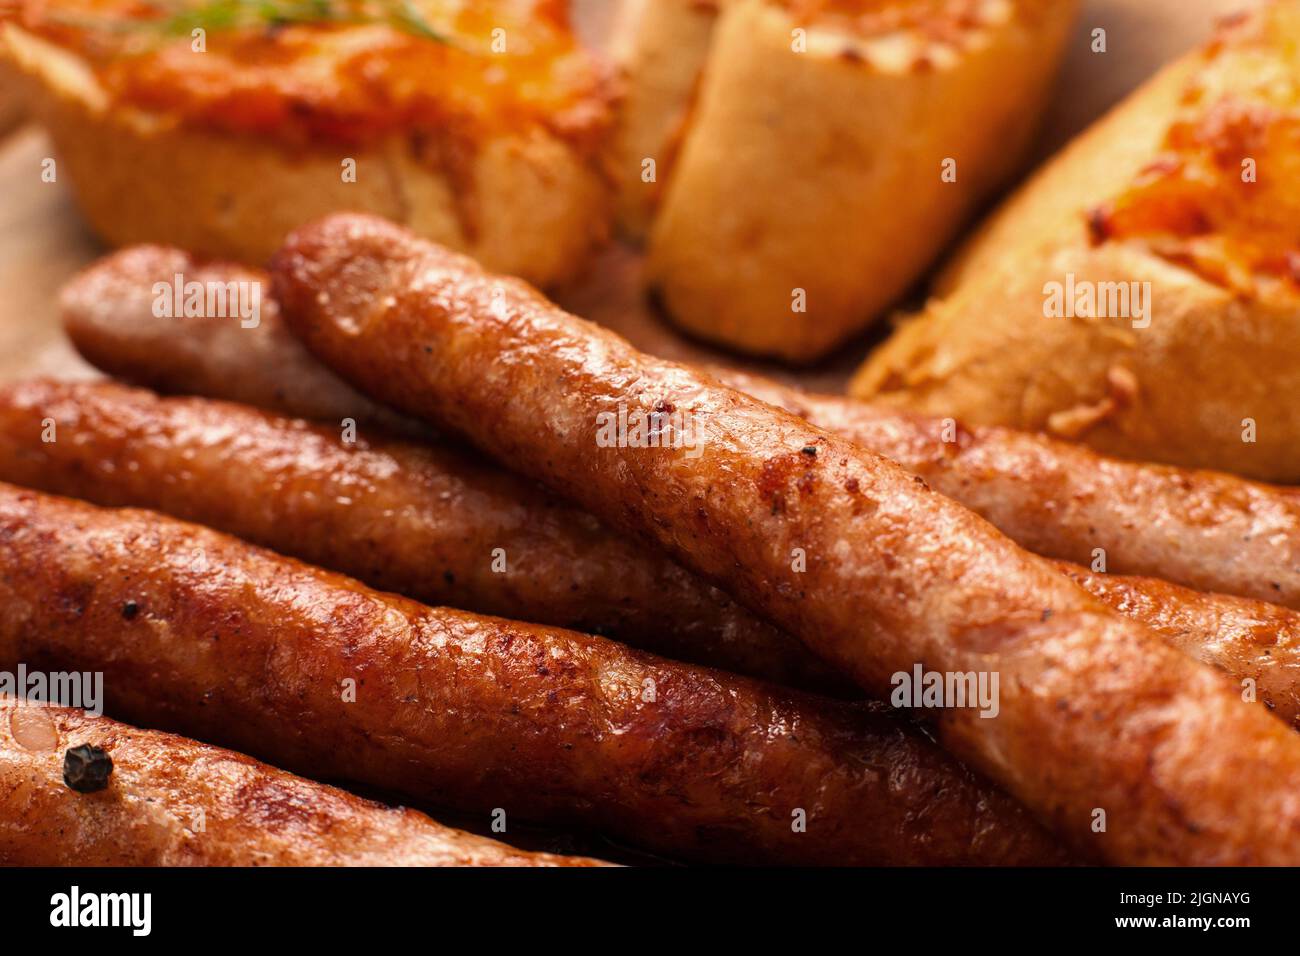 Appetizing grilled snack for beer background Stock Photo